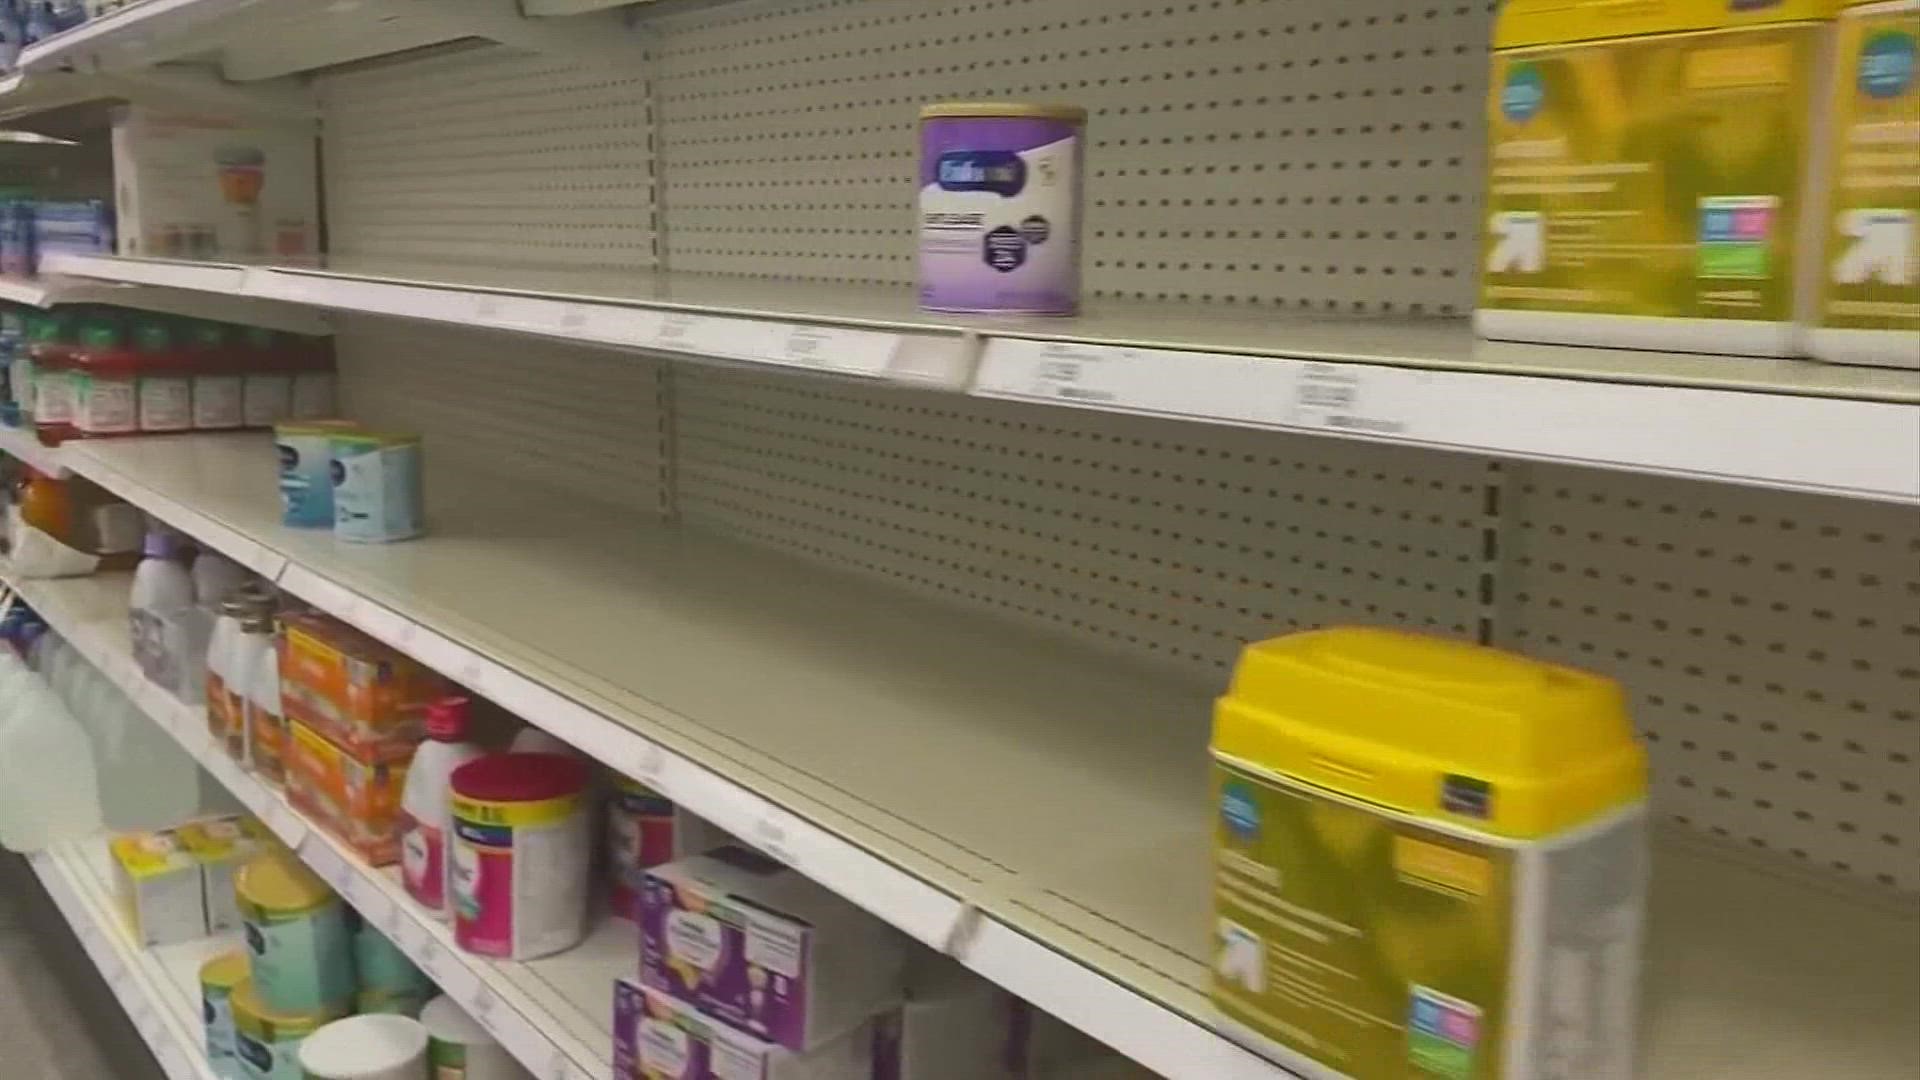 The baby formula will be distributed to Walmarts across the nation, including Ohio.